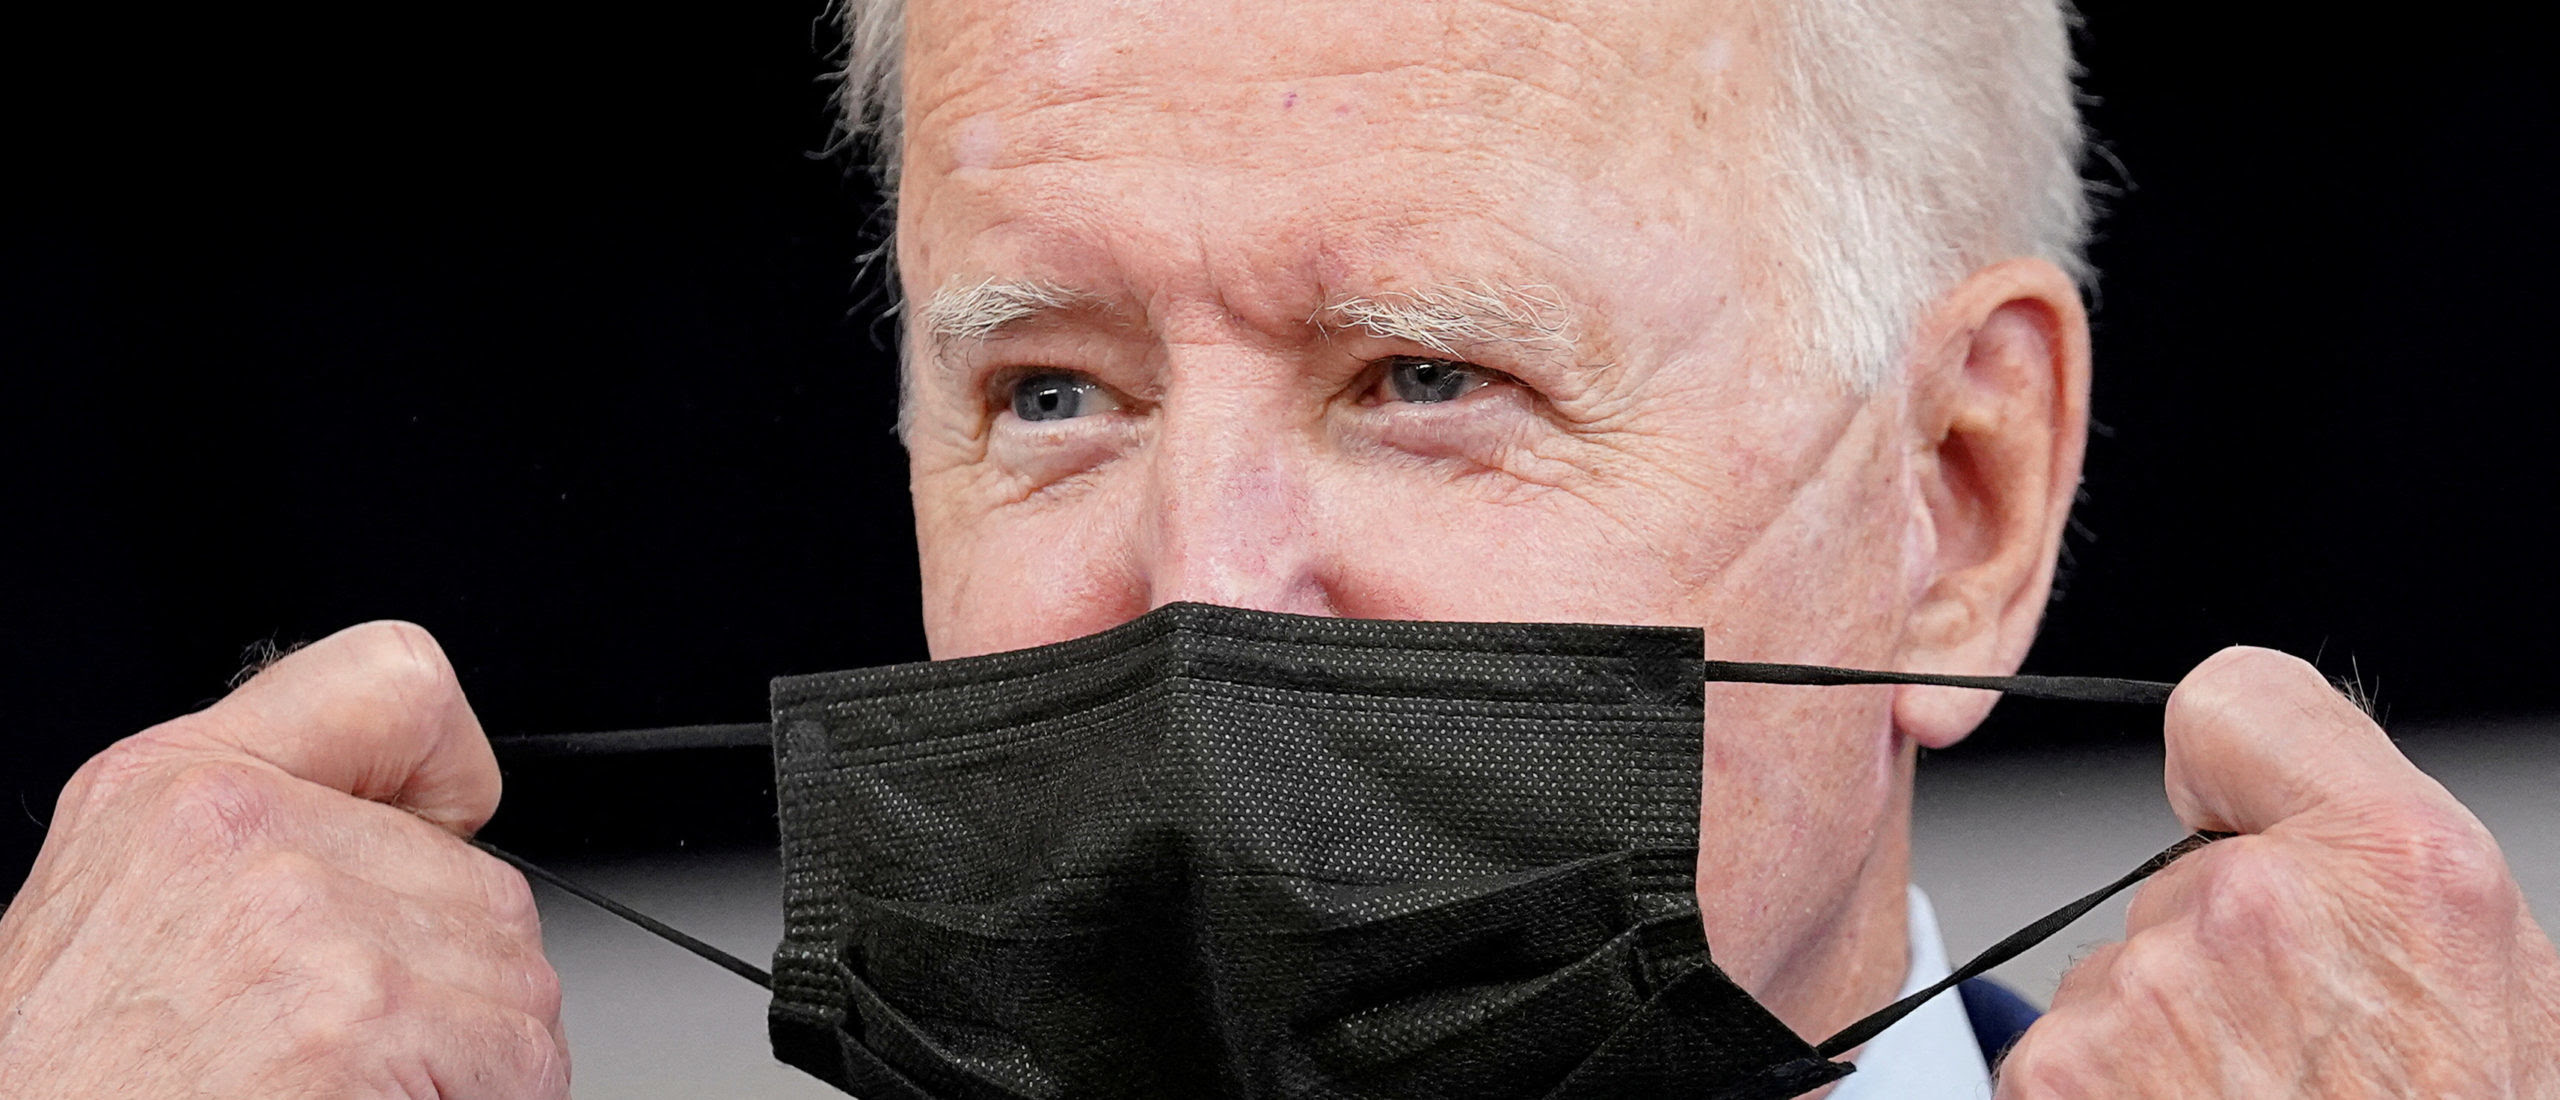 Biden Admin Secretly Pressured Twitter To Ban Prominent Critic For COVID Takes: REPORT